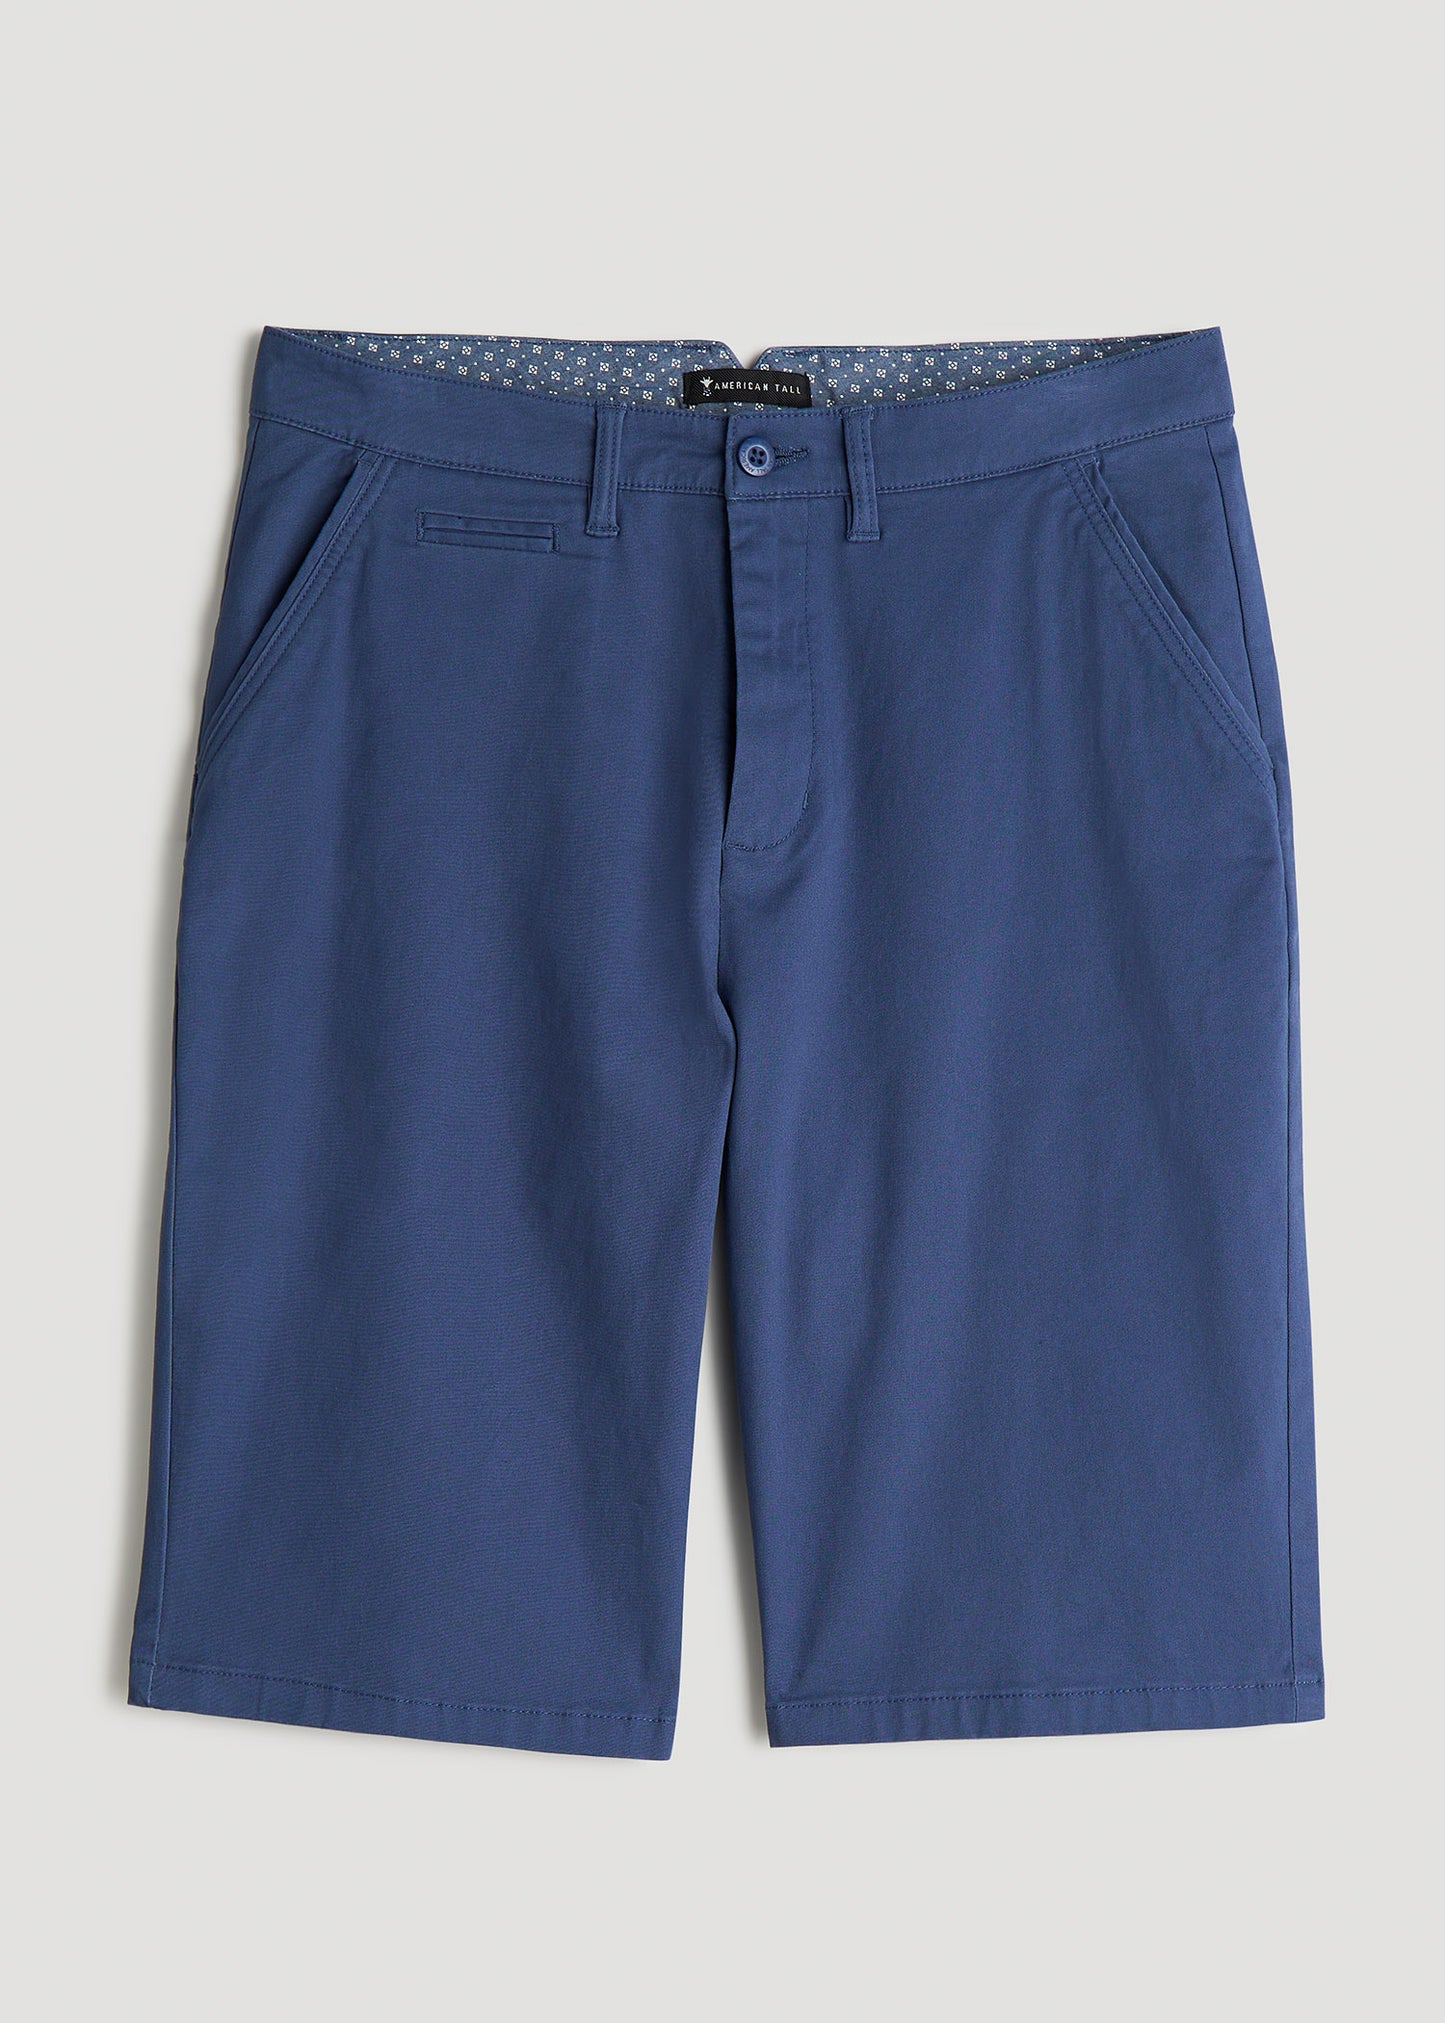 Chino Shorts for Tall Men in Dark Sand